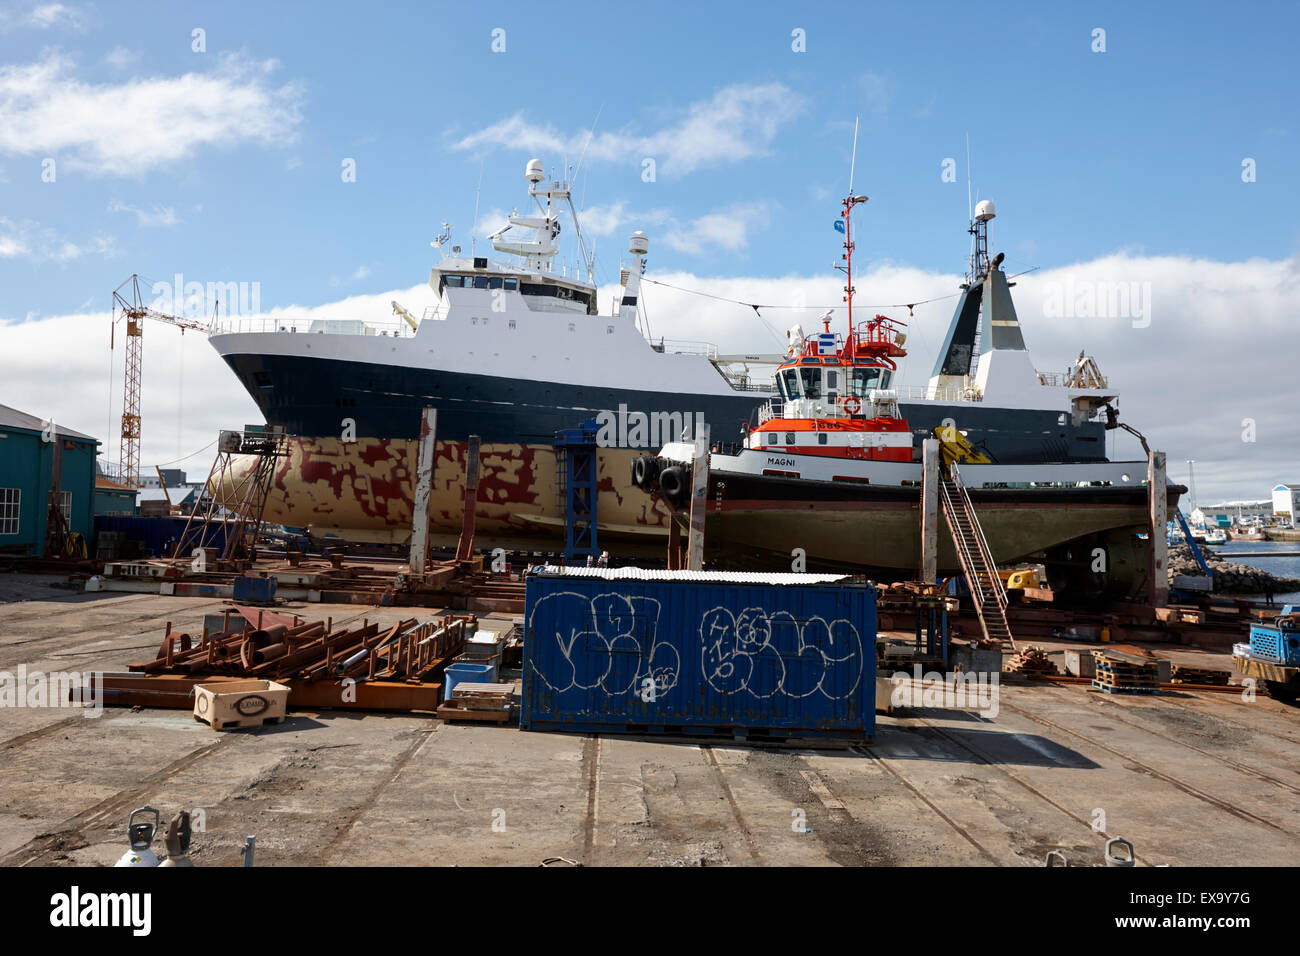 boats and ship in dry dock in reykjavik harbour iceland Stock Photo